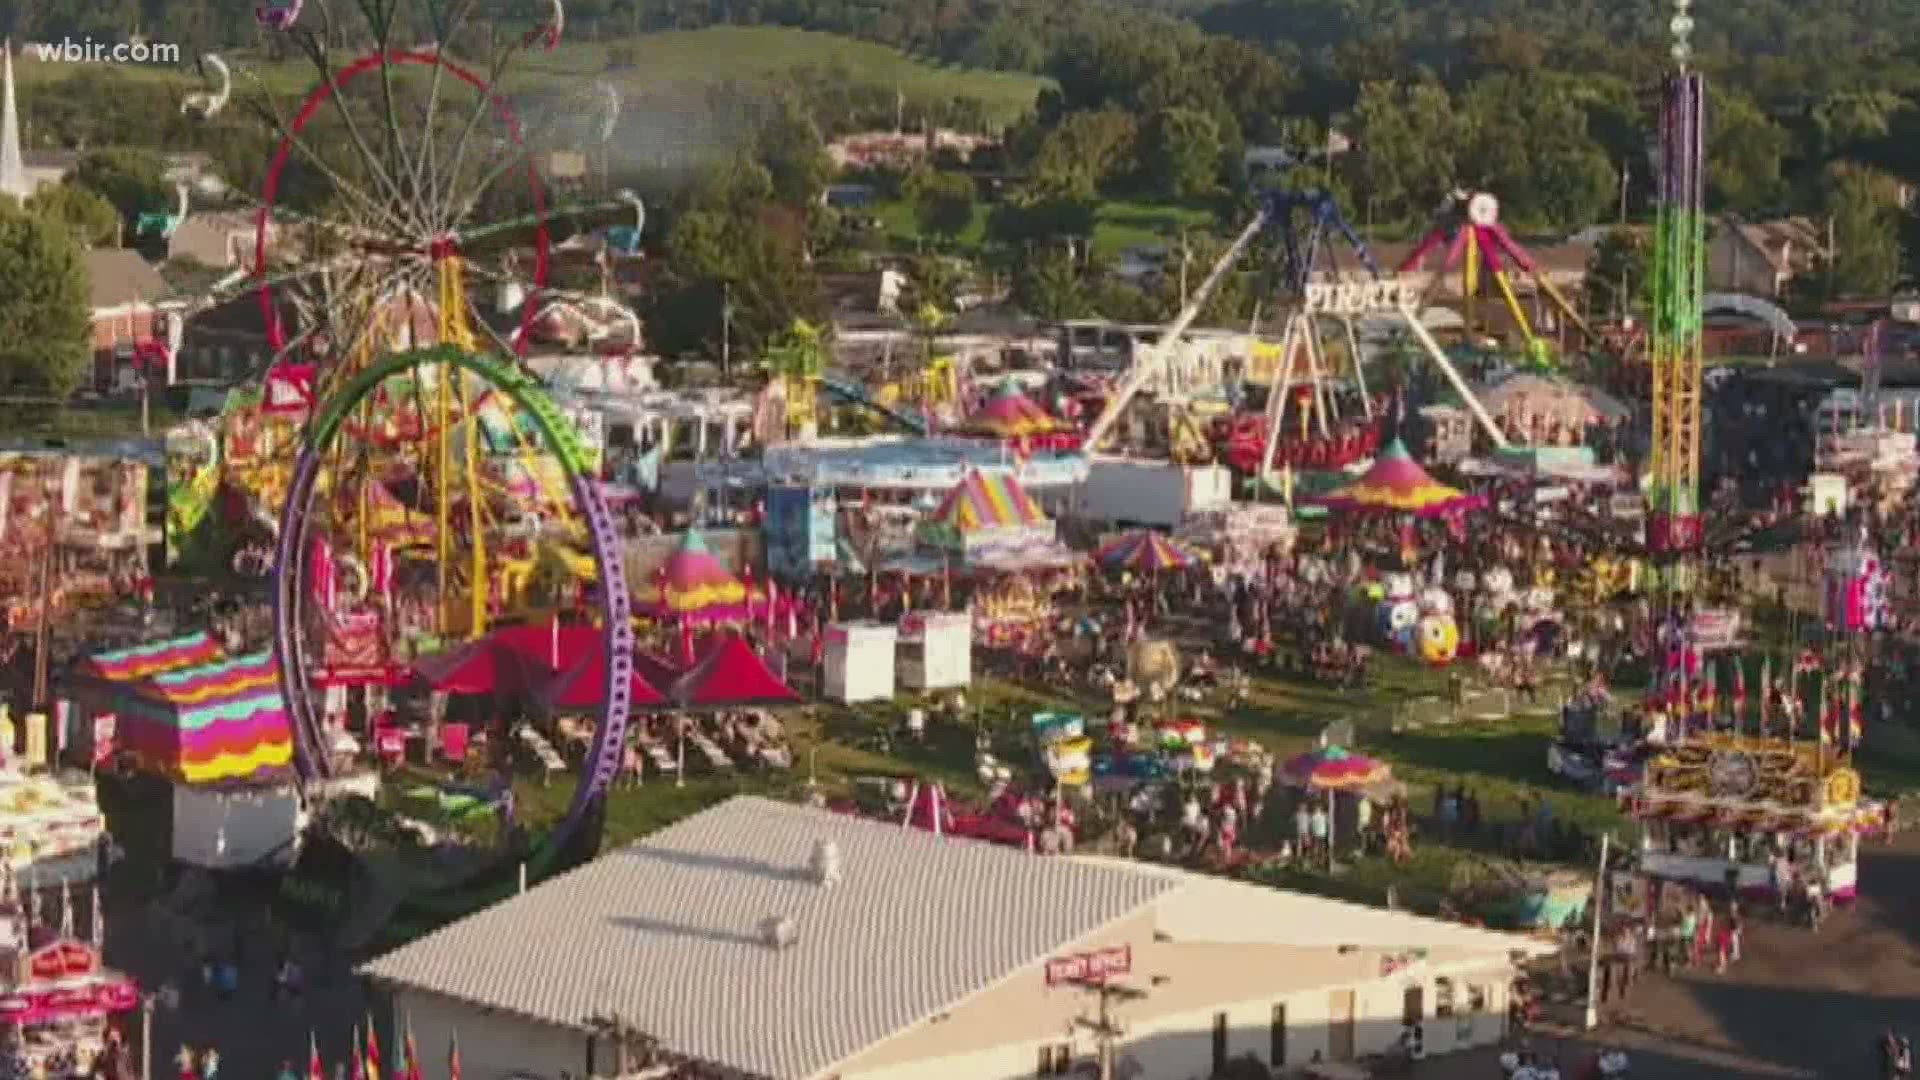 Tennessee provides money for struggling county fairs.